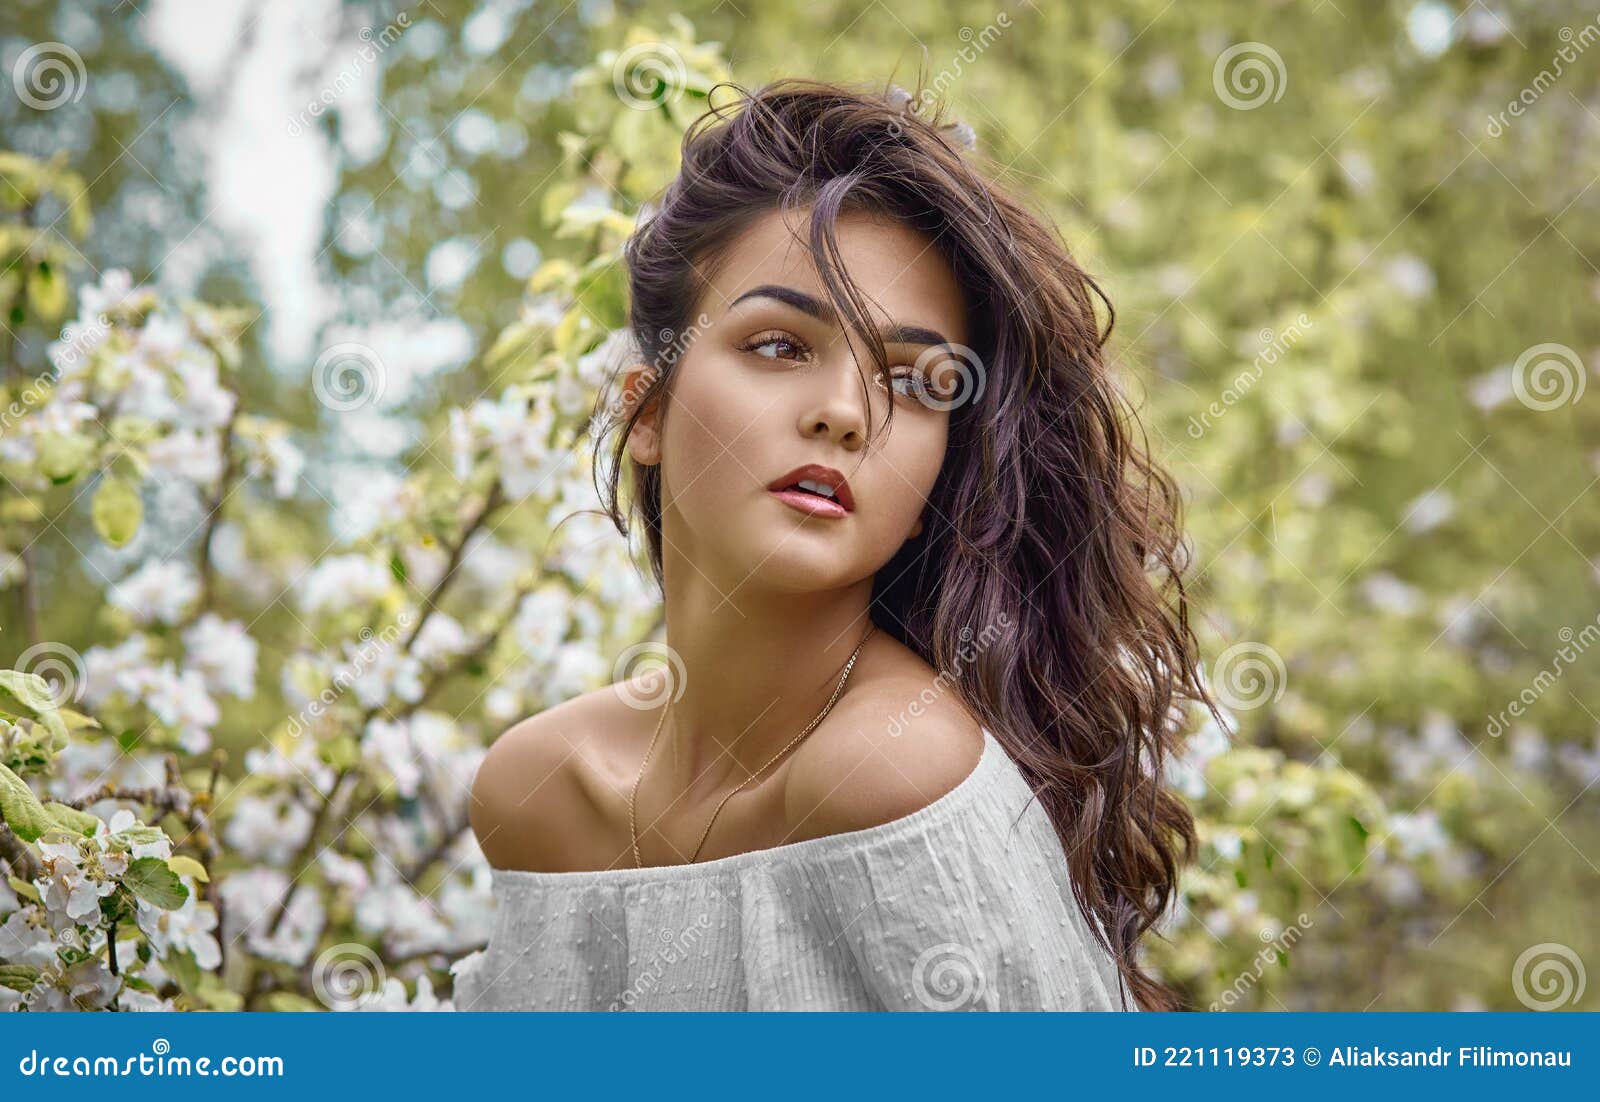 Portrait Of A Gentle Young Elegant Beautiful Girl In The Garden Near The Blossoming Apple Tree